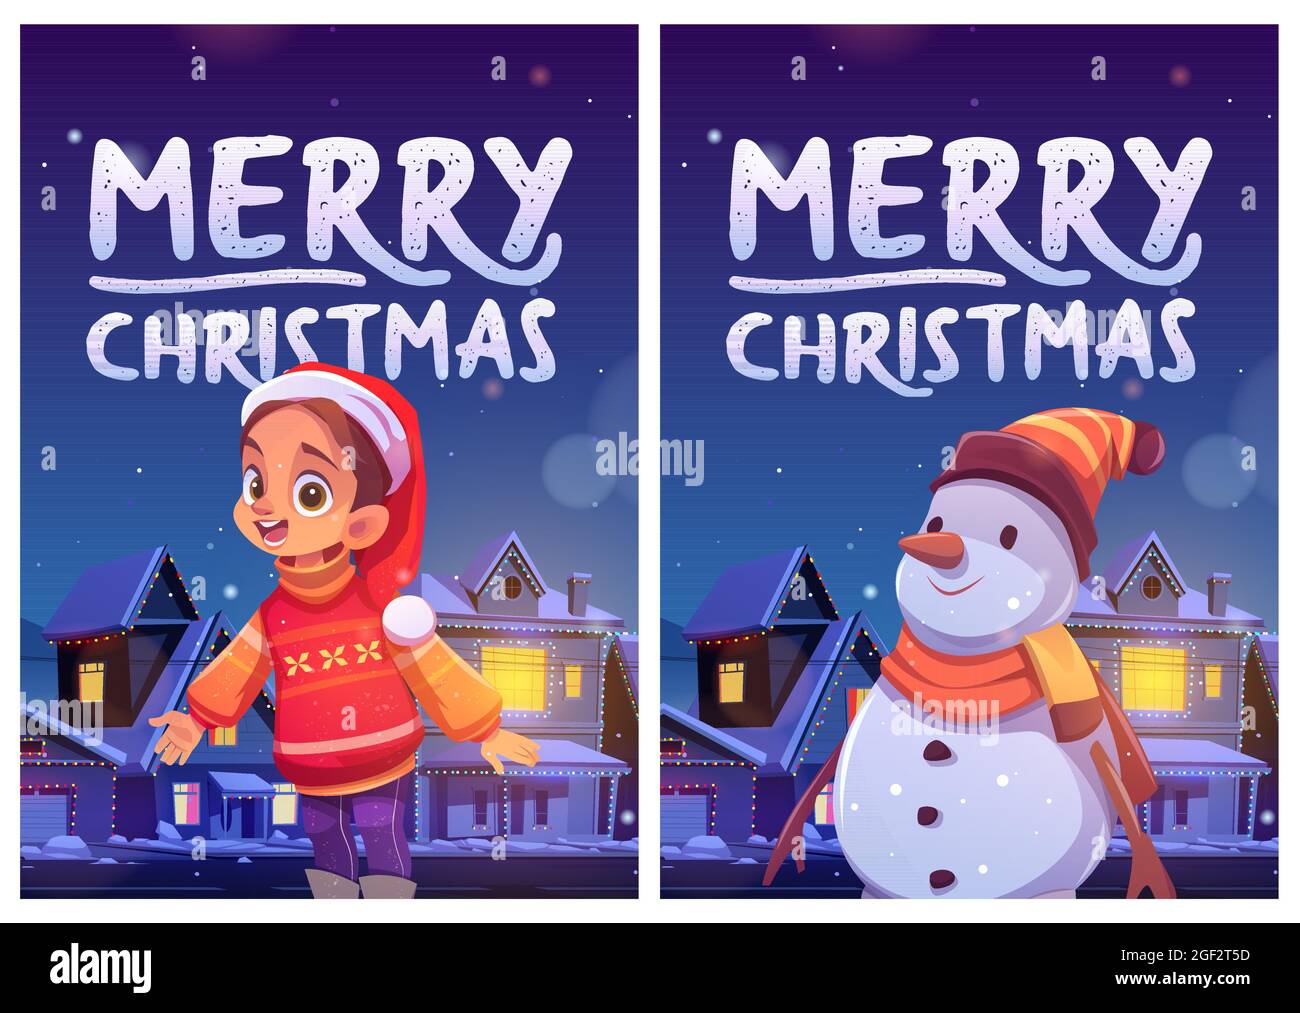 Merry Christmas flyers with cute girl and snowman Stock Vector